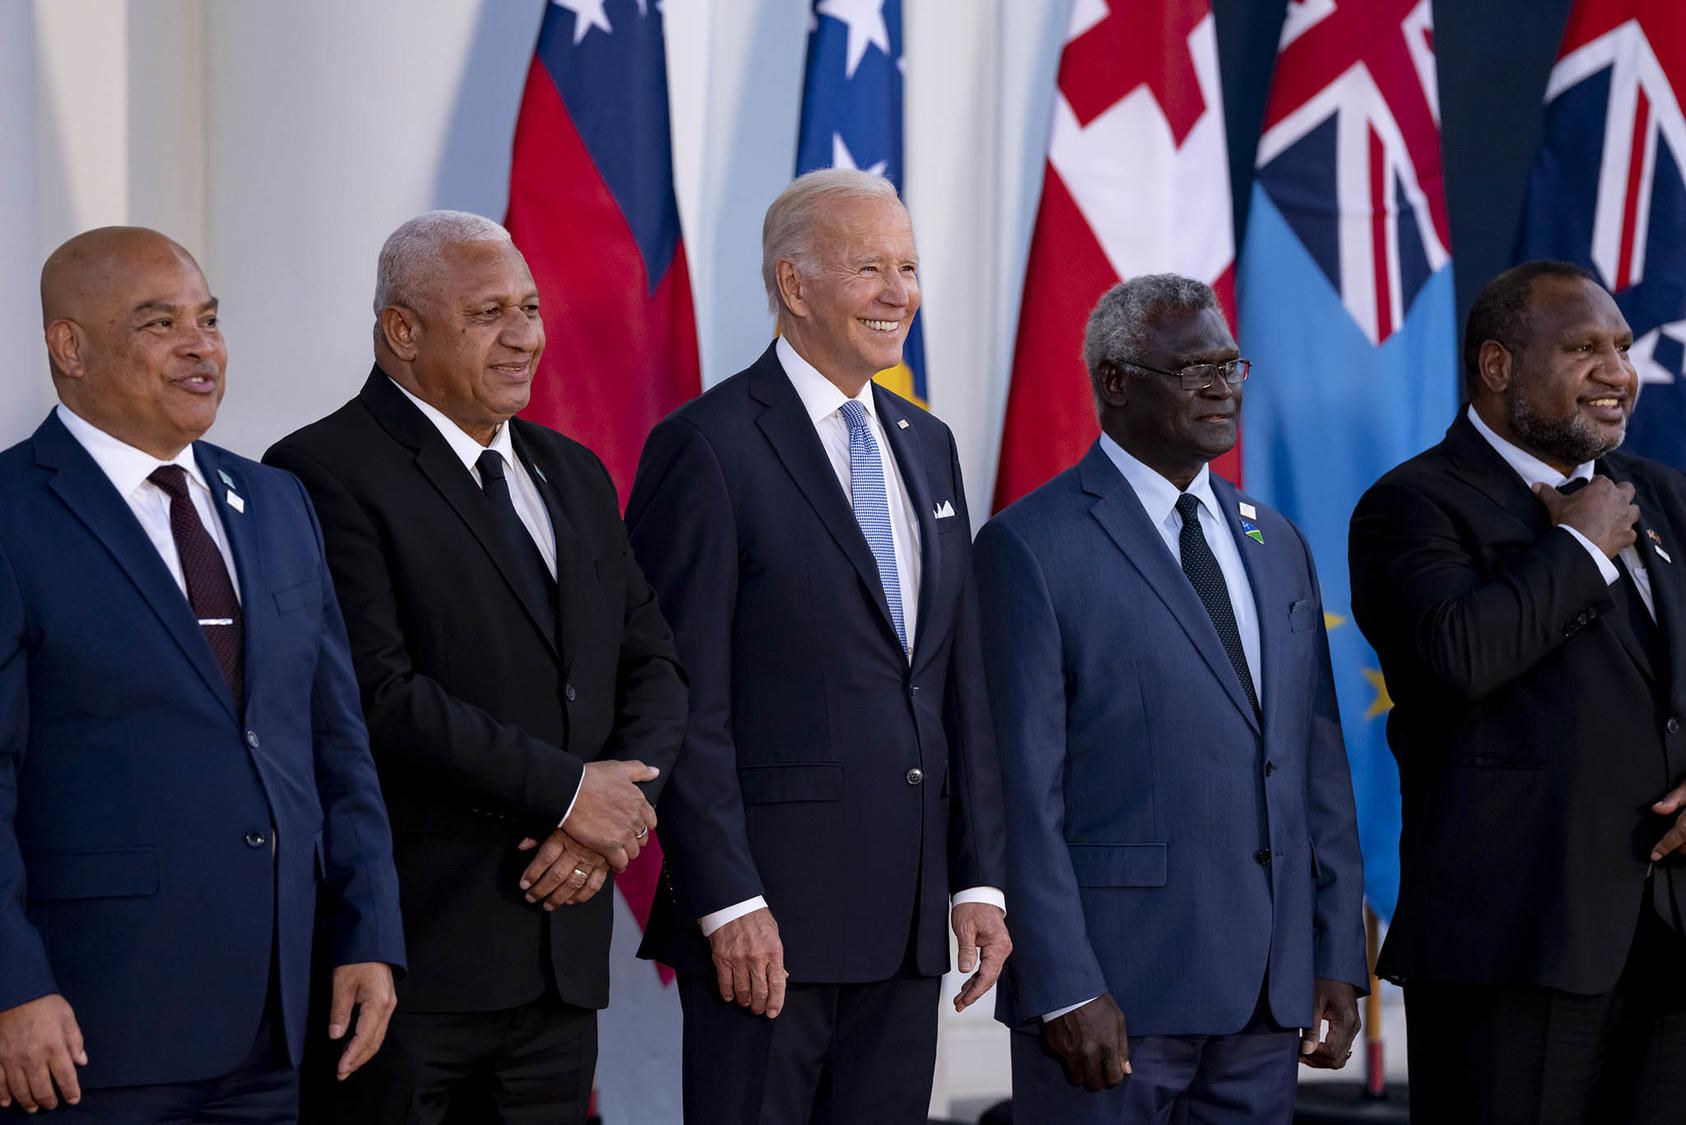 President Joe Biden poses for a photo with Pacific Island leaders at the White House during the first U.S.-Pacific Islands Summit. September 29, 2022. (Erin Scott/Official White House Photo – Flickr)